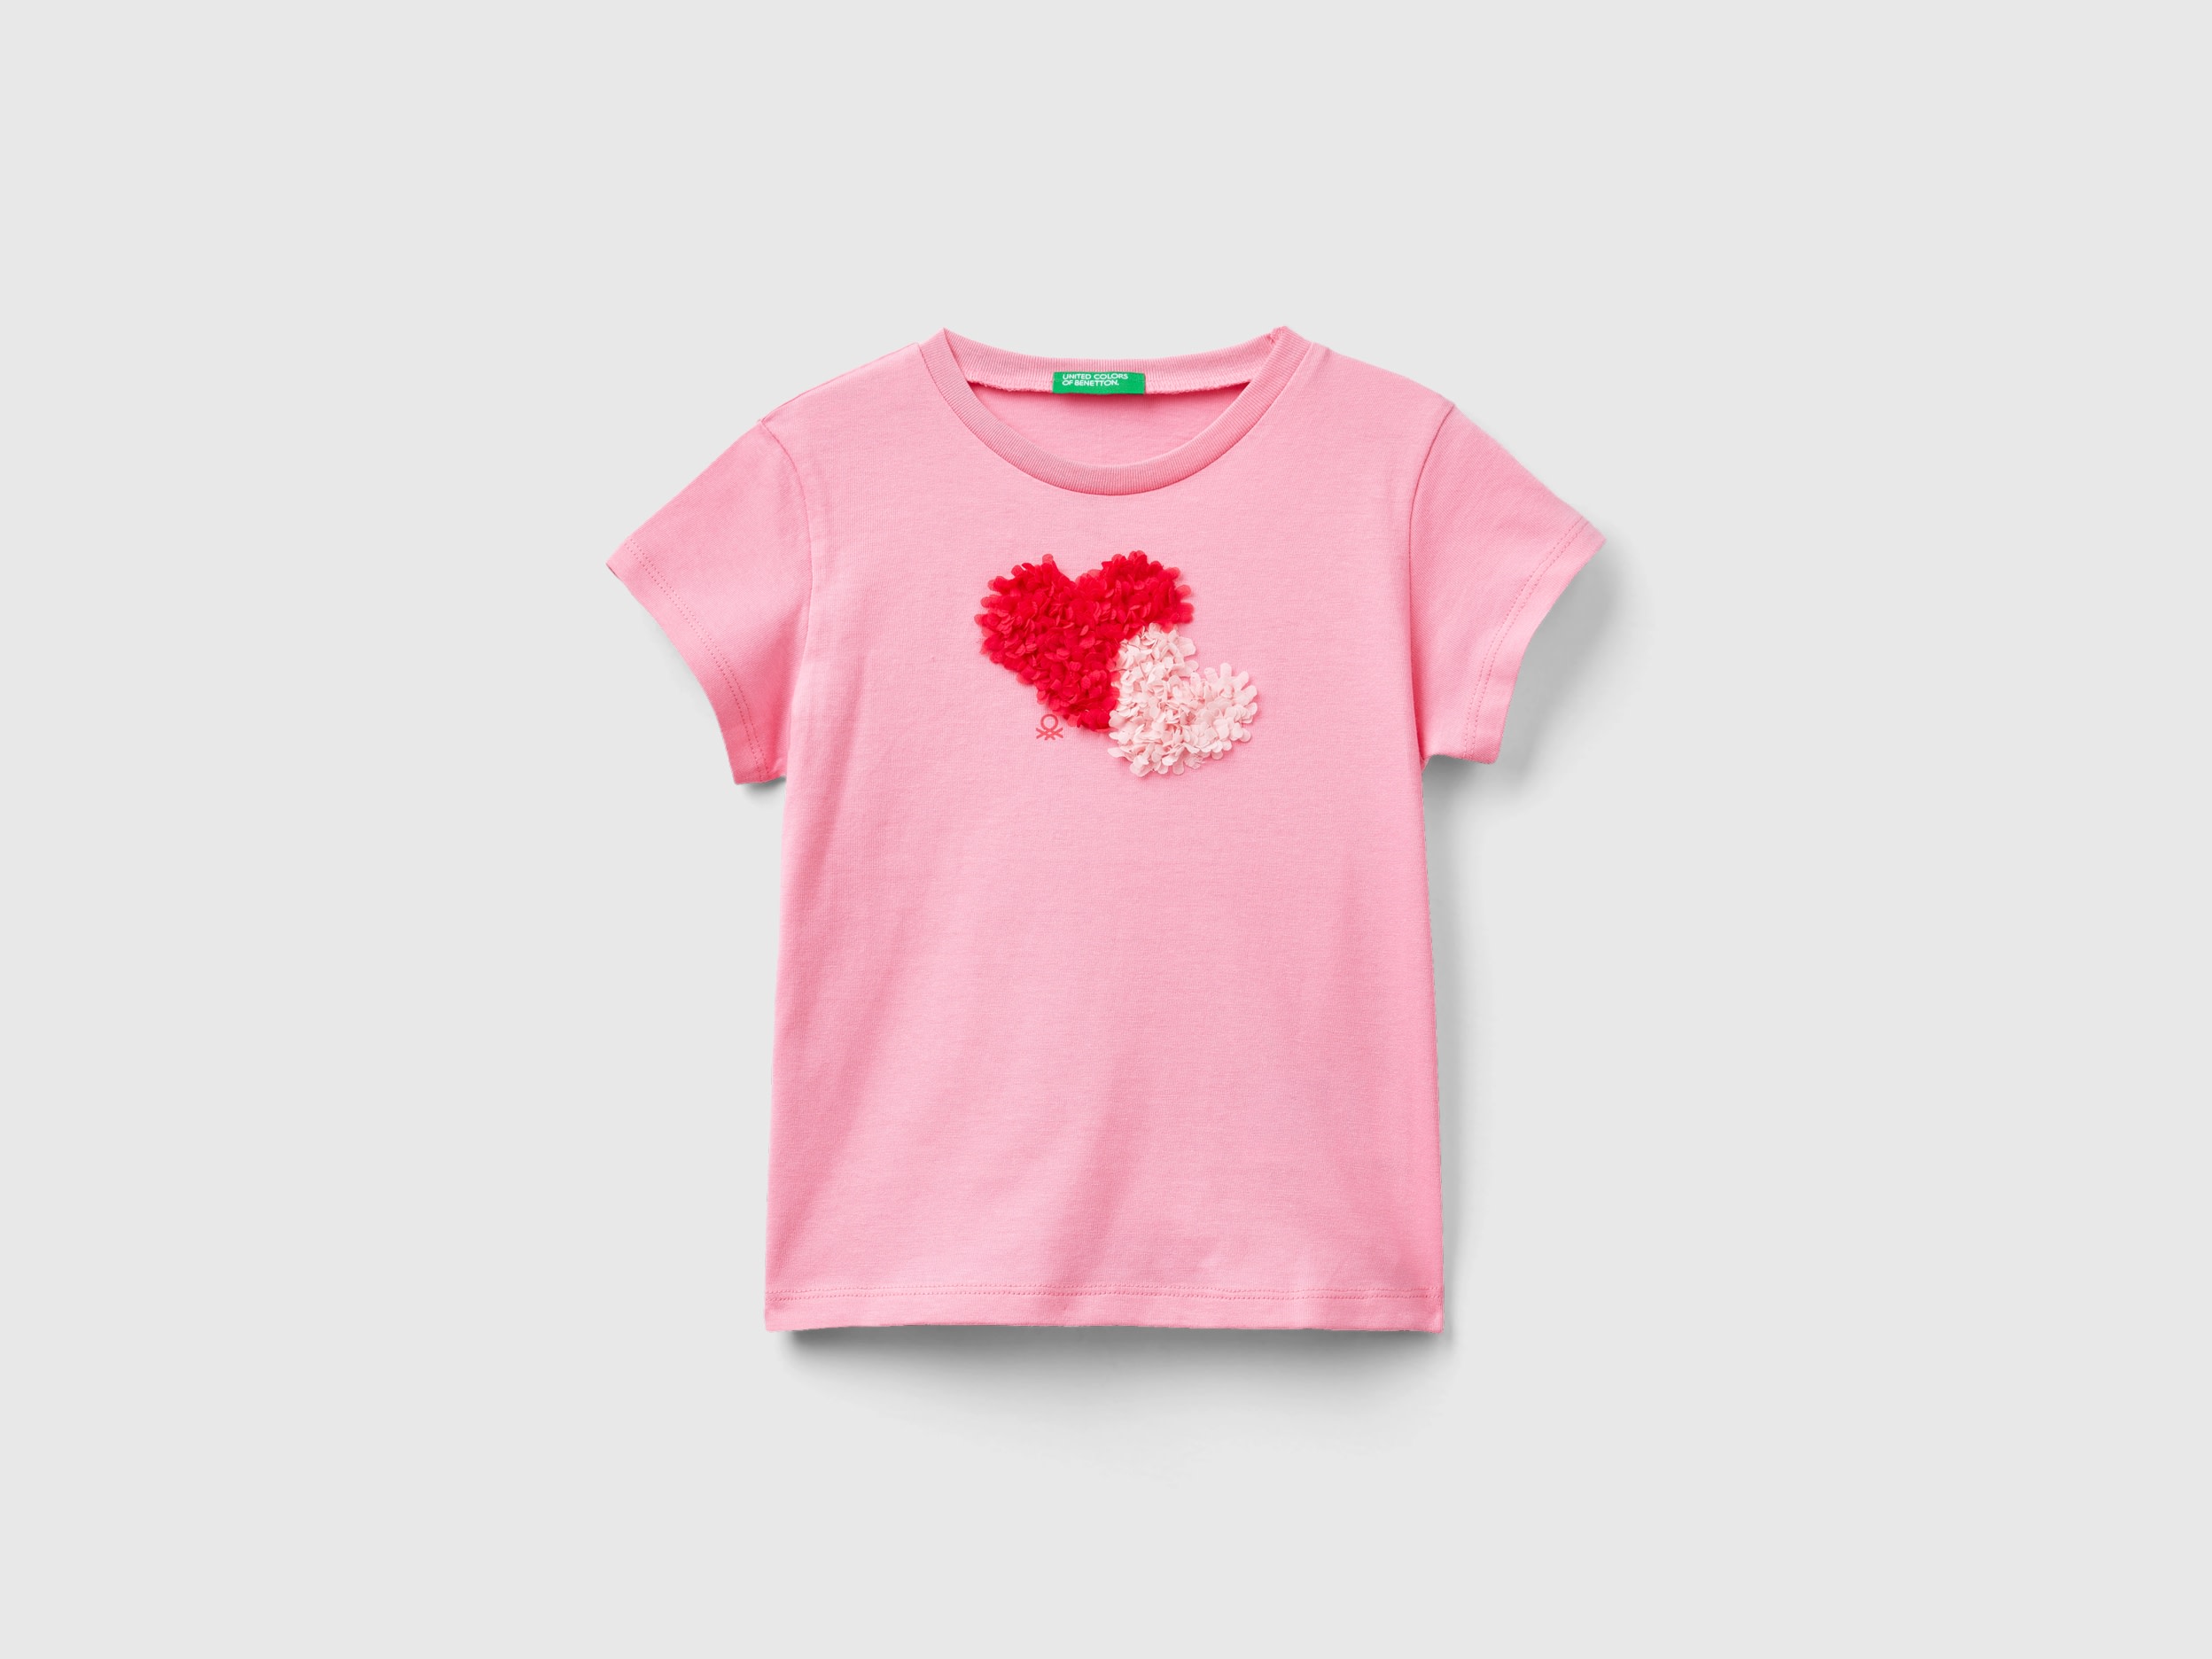 Image of Benetton, T-shirt With Petal Effect Applique, size 82, Pink, Kids